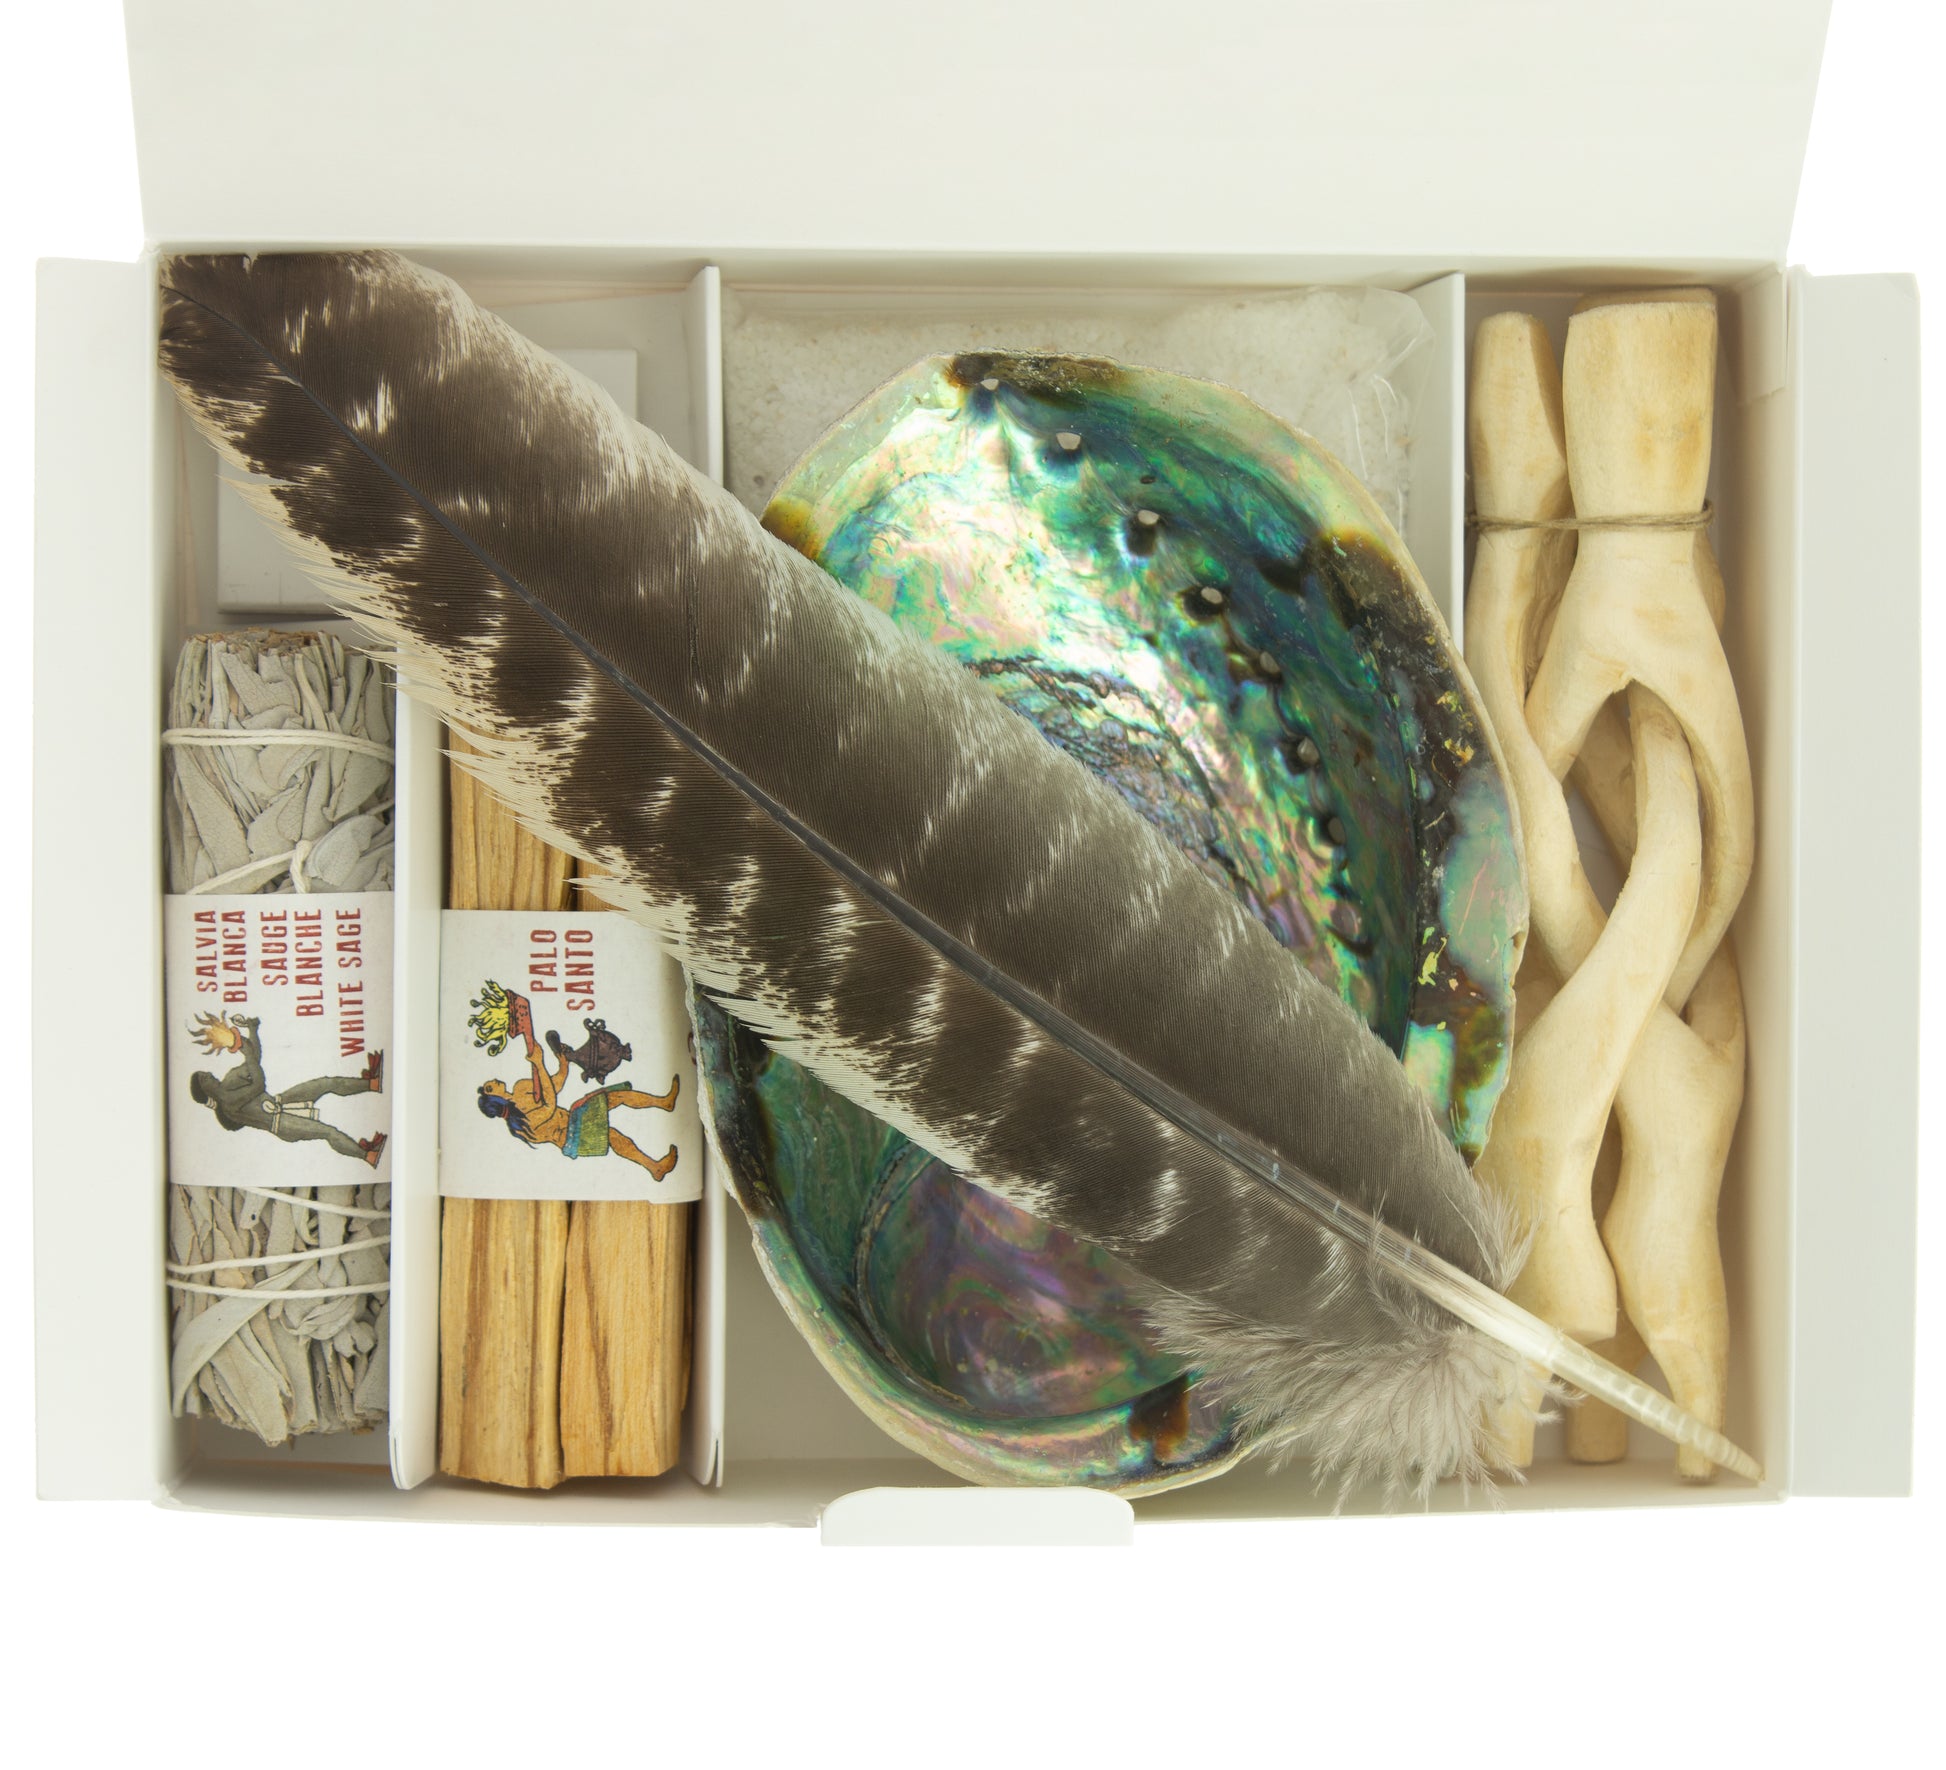 Palo Santo Smudge Kit With 4-5in Abalone Shell // Tiny RItuals